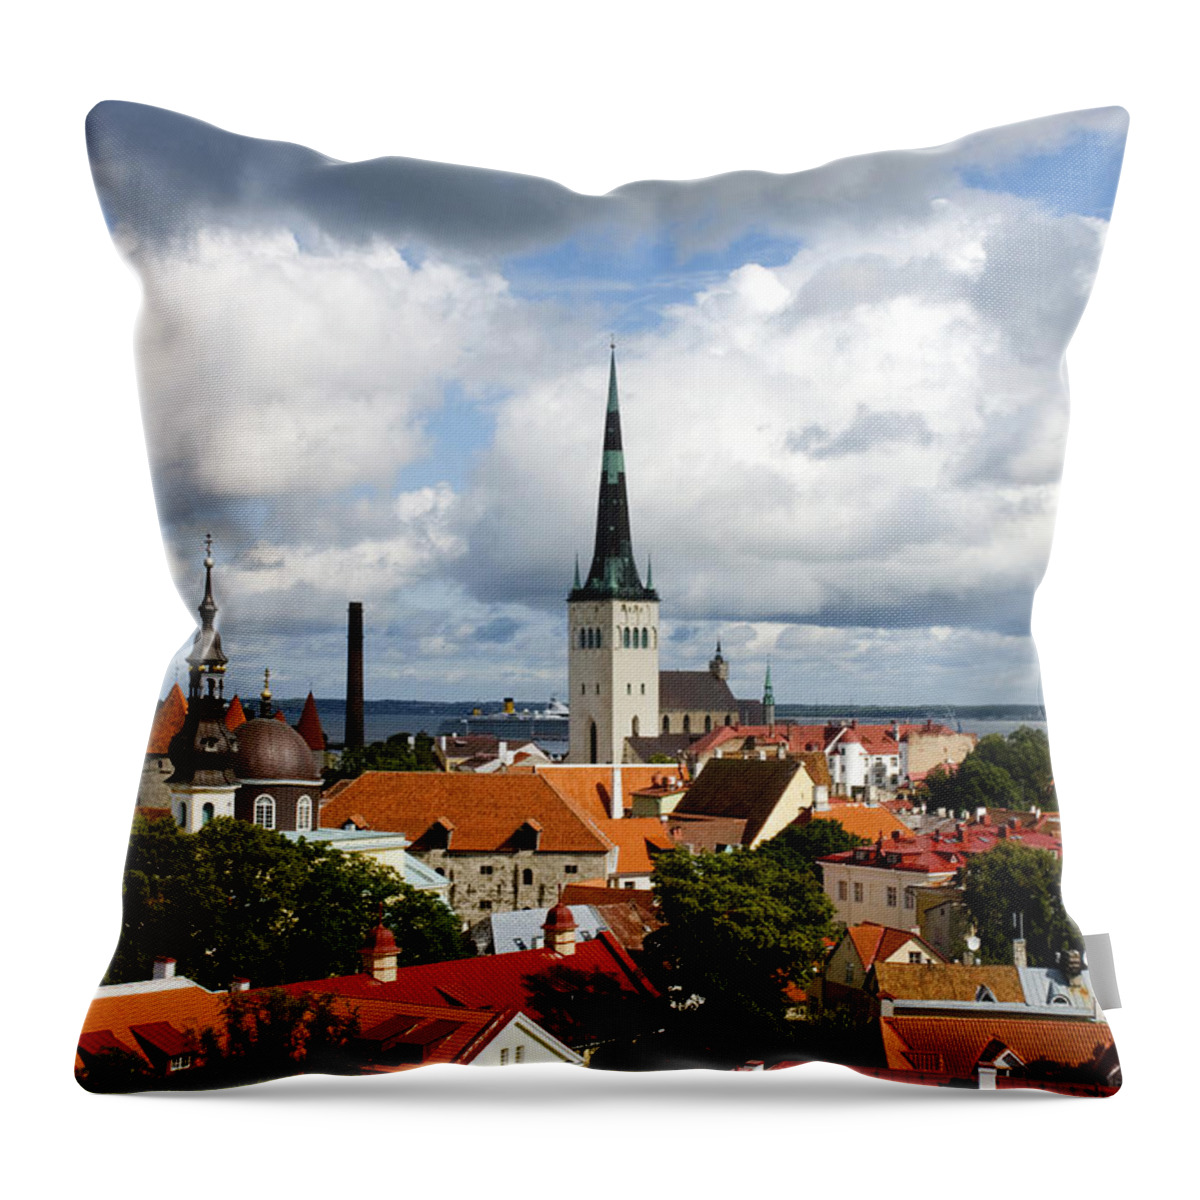 Olav Throw Pillow featuring the photograph View of St Olav's Church by Fabrizio Troiani